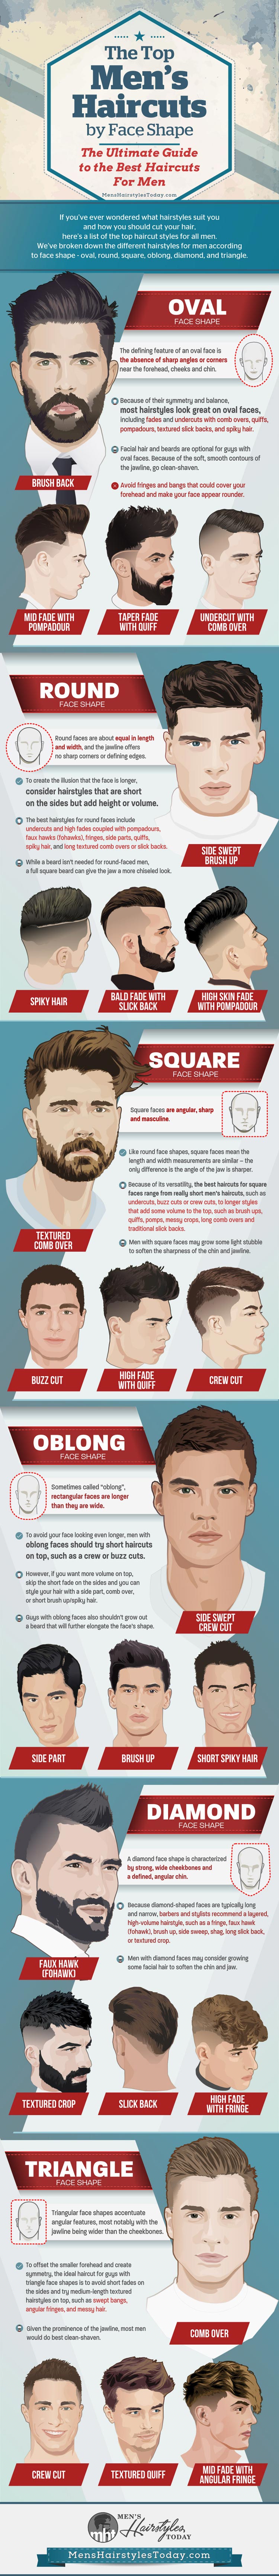 15 Quiff Hairstyles to Show Your Barber ASAP